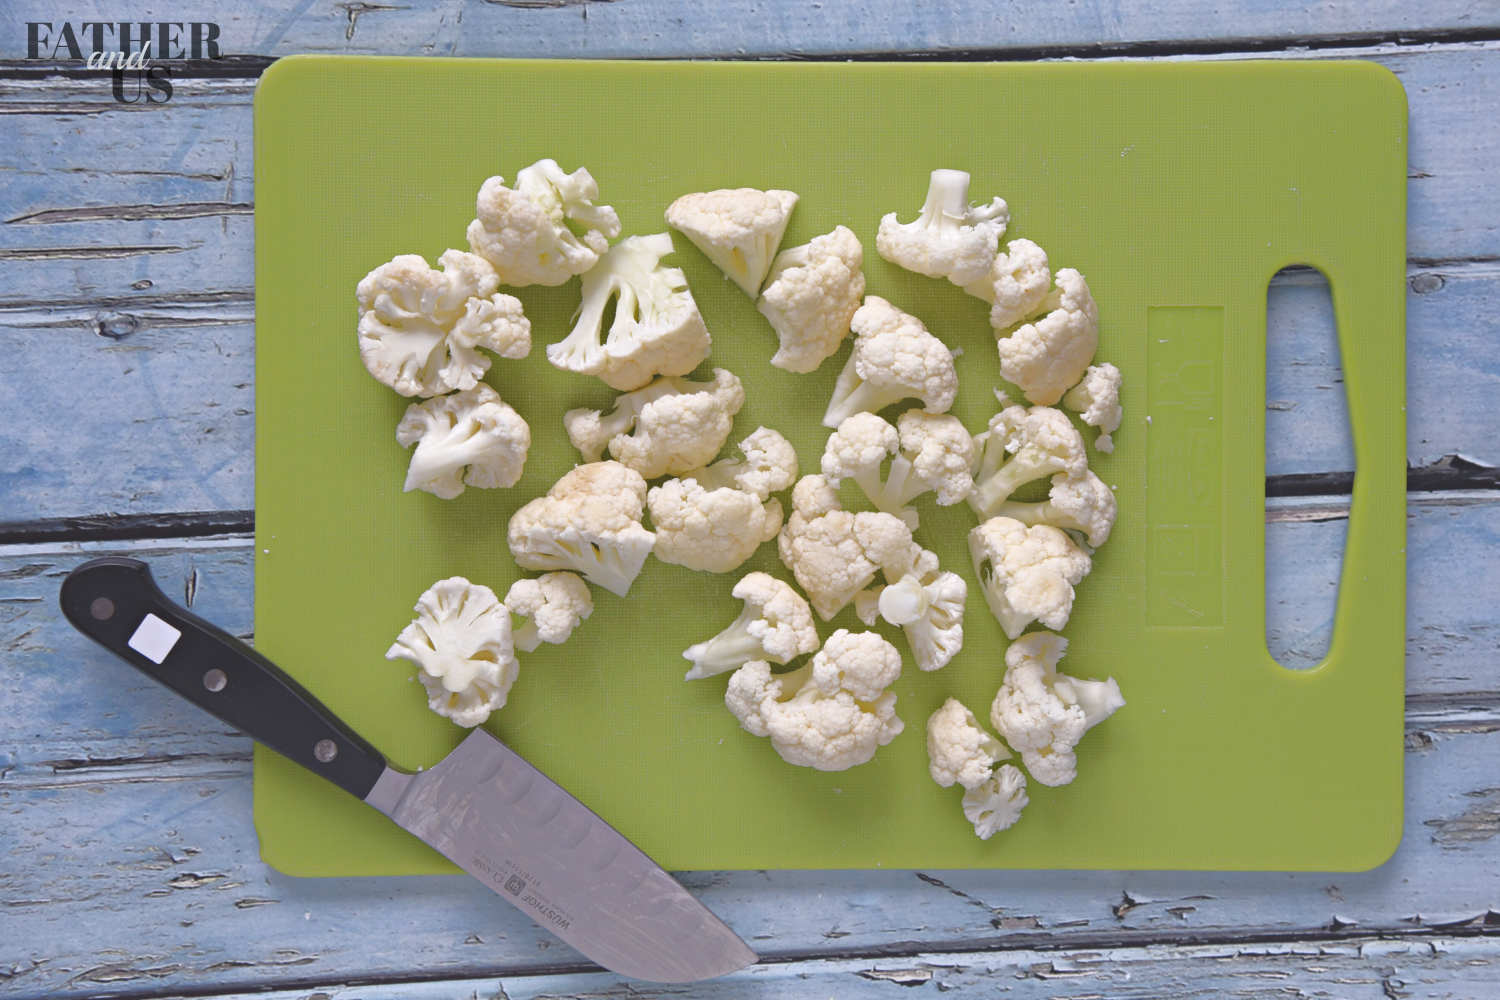 Make sure to cut up your Cauliflower into even pieces for this Air Fryer Cauliflower. 